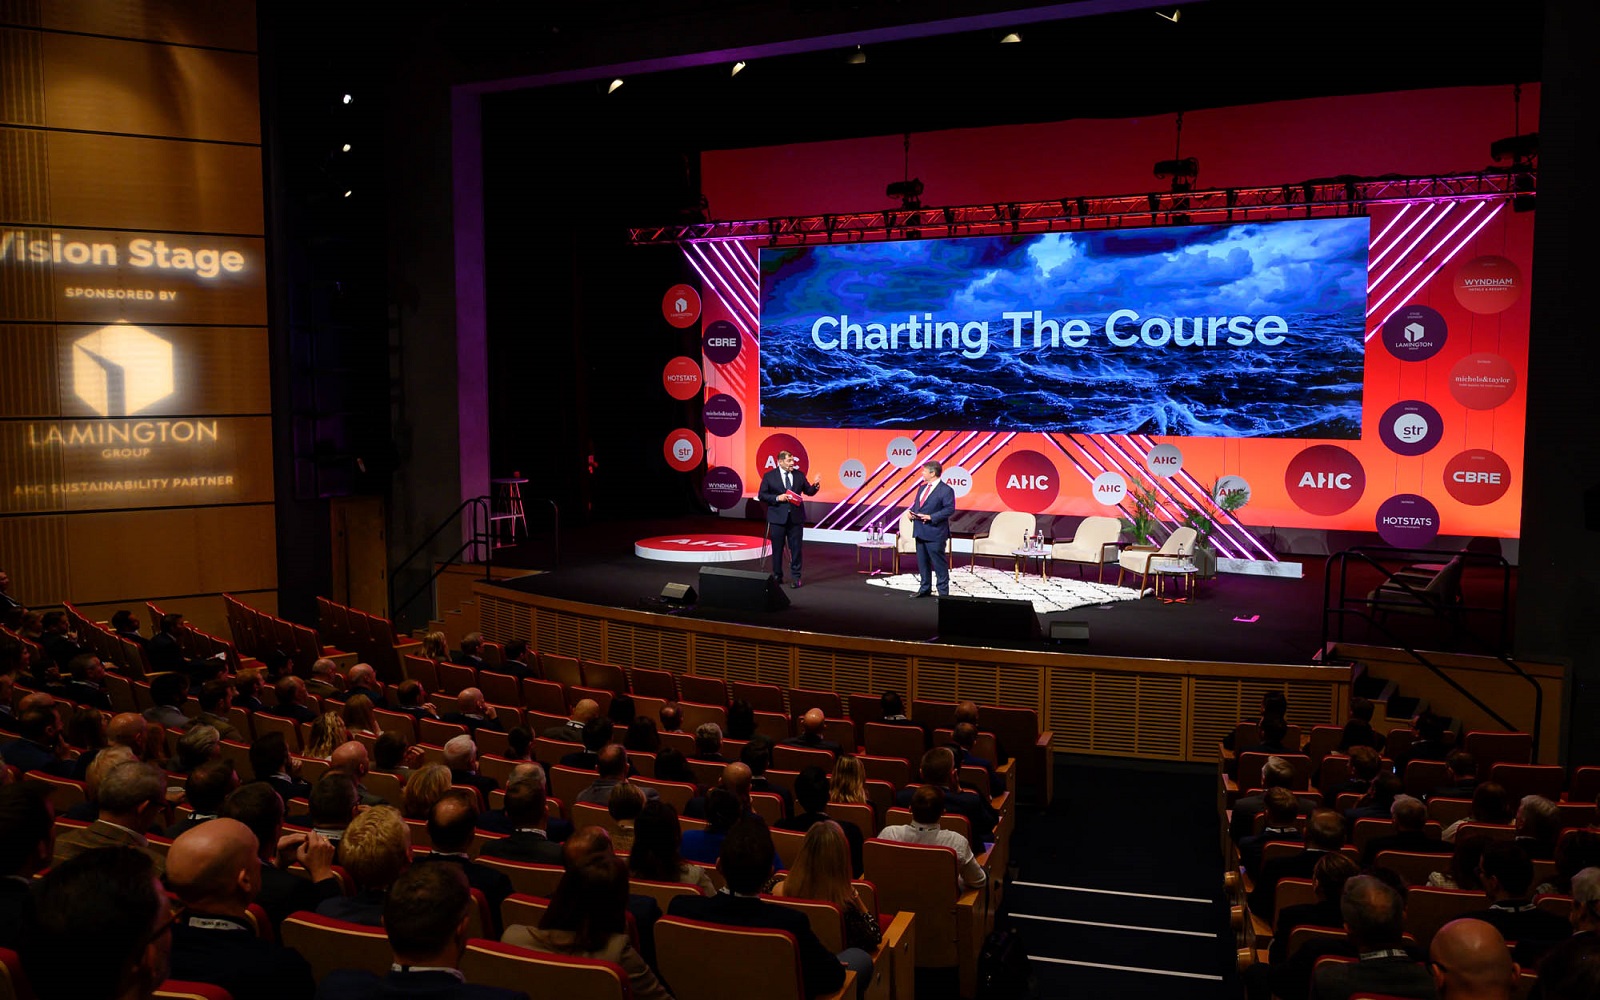 Charting the Course logo and stage at the Annual Hotel conference 2022